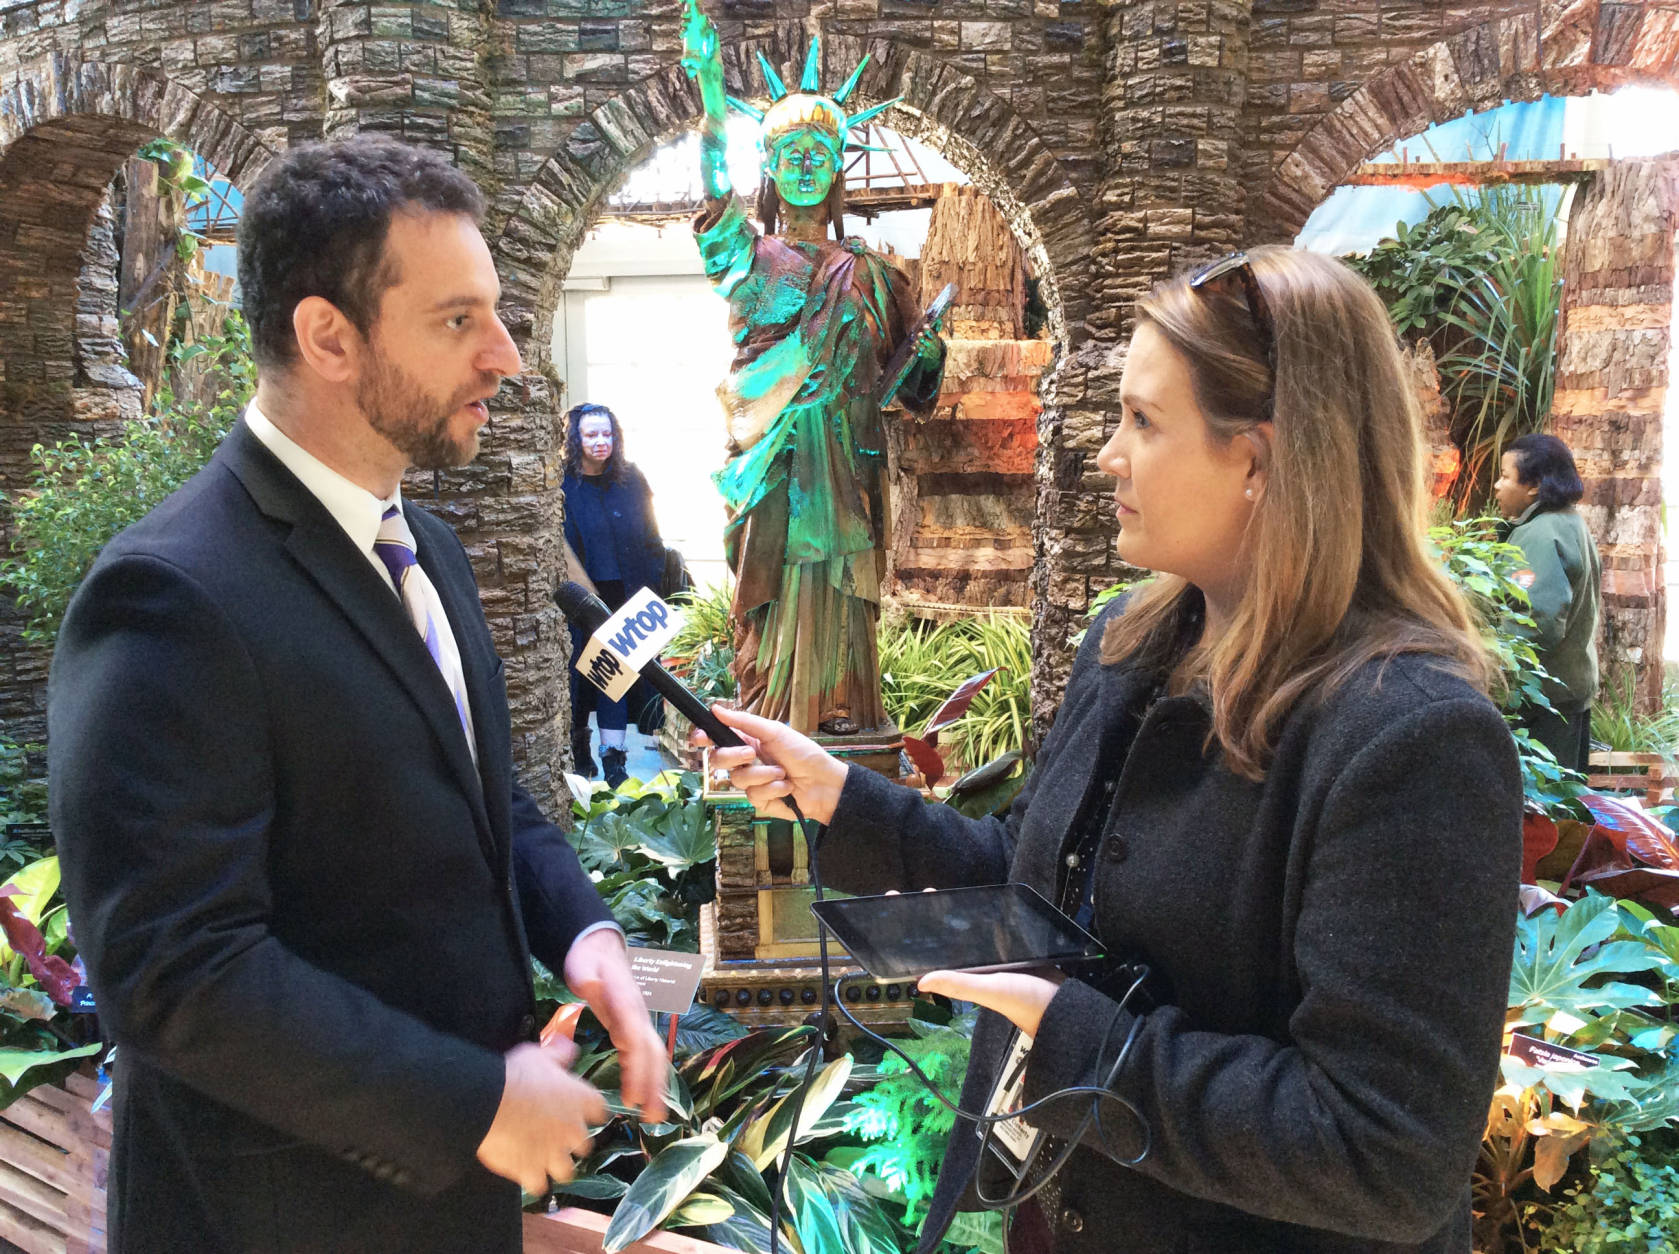 WTOP's Megan Cloherty visited the garden to interview the people behind the  scenes of the special holiday exhibit. (WTOP/Hanna Choi)